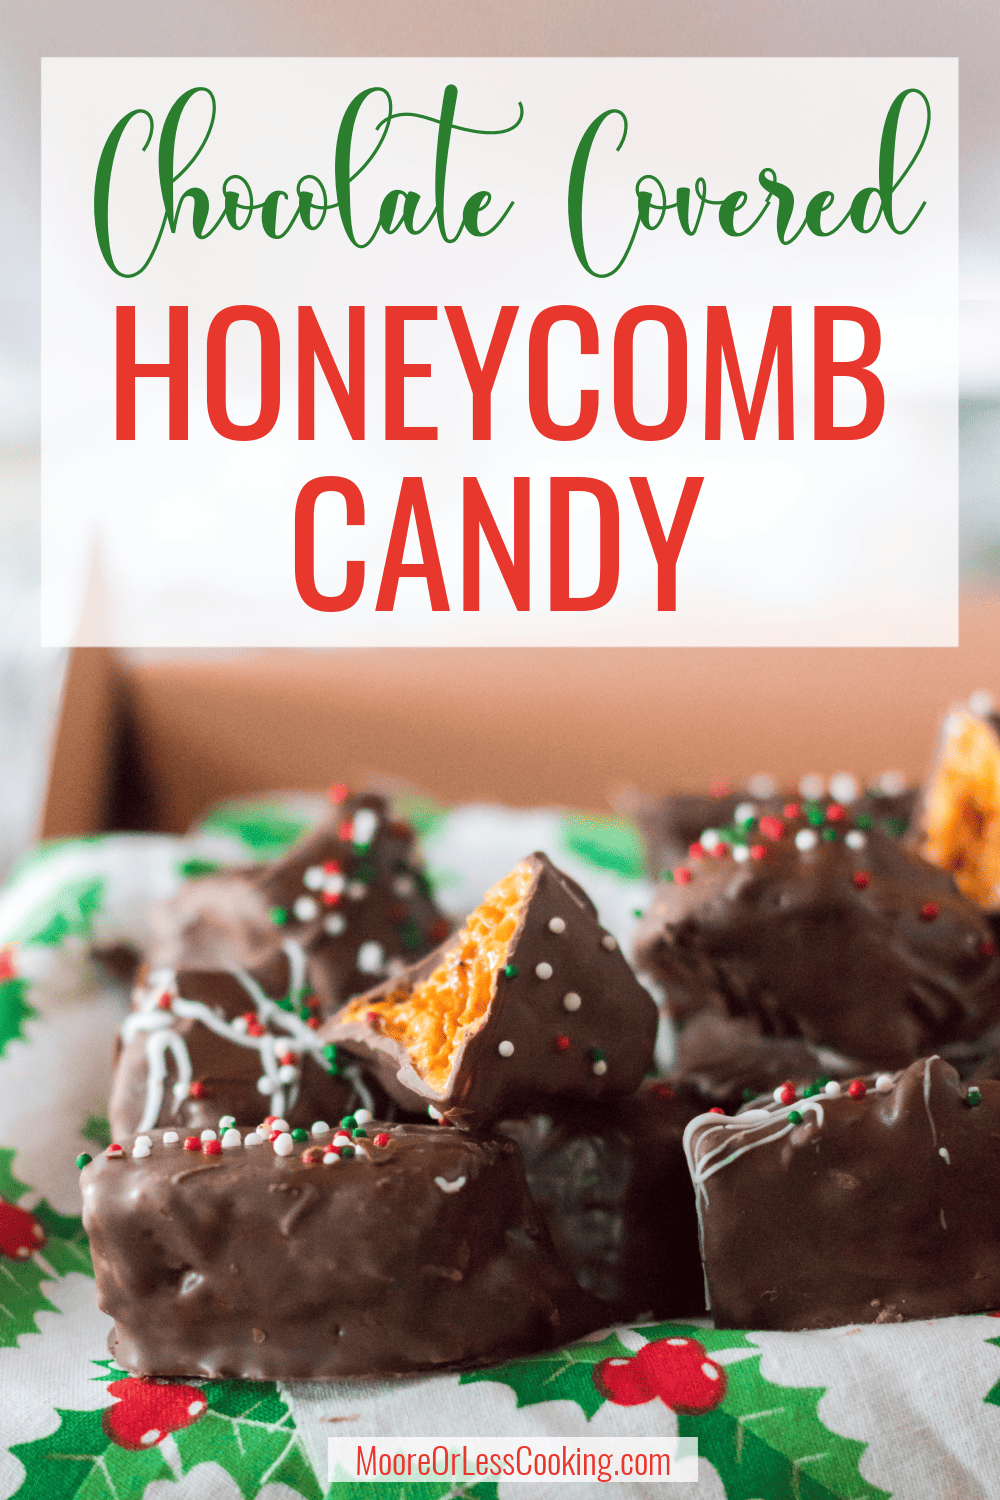 Light, airy, sweet, and crunchy, this Chocolate Covered Honeycomb Candy is a scrumptious caramel-flavored treat. With just a few ingredients, you can make this decadent candy right at home with this easy and fun recipe. via @Mooreorlesscook